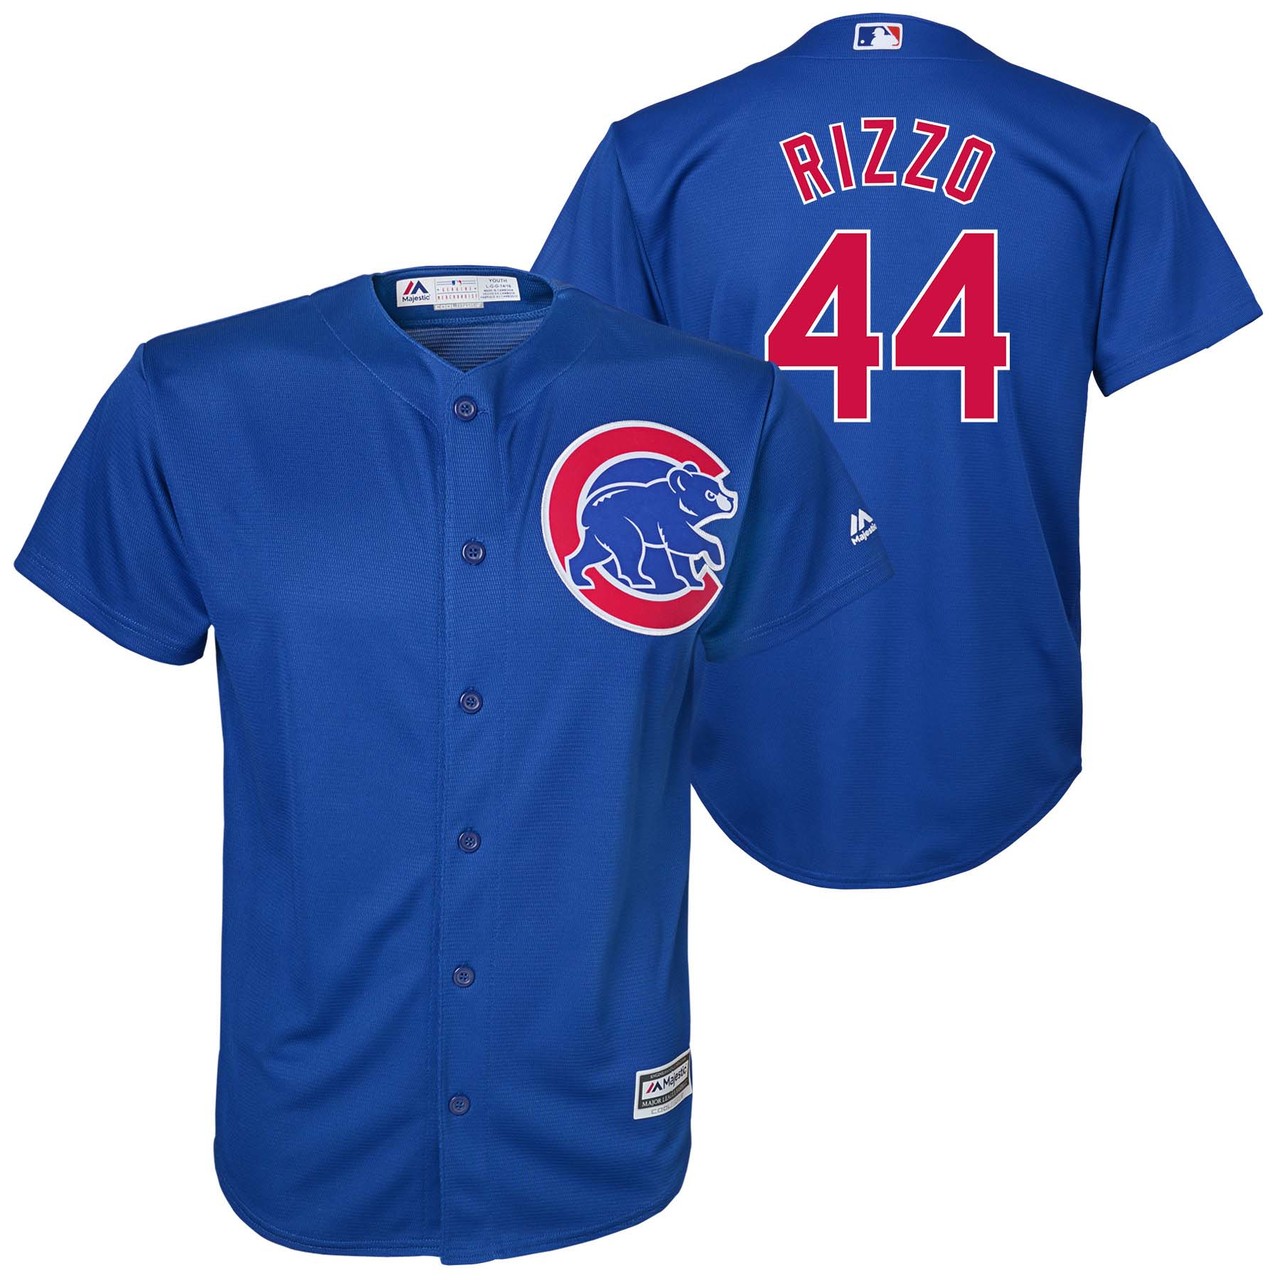 youth rizzo jersey